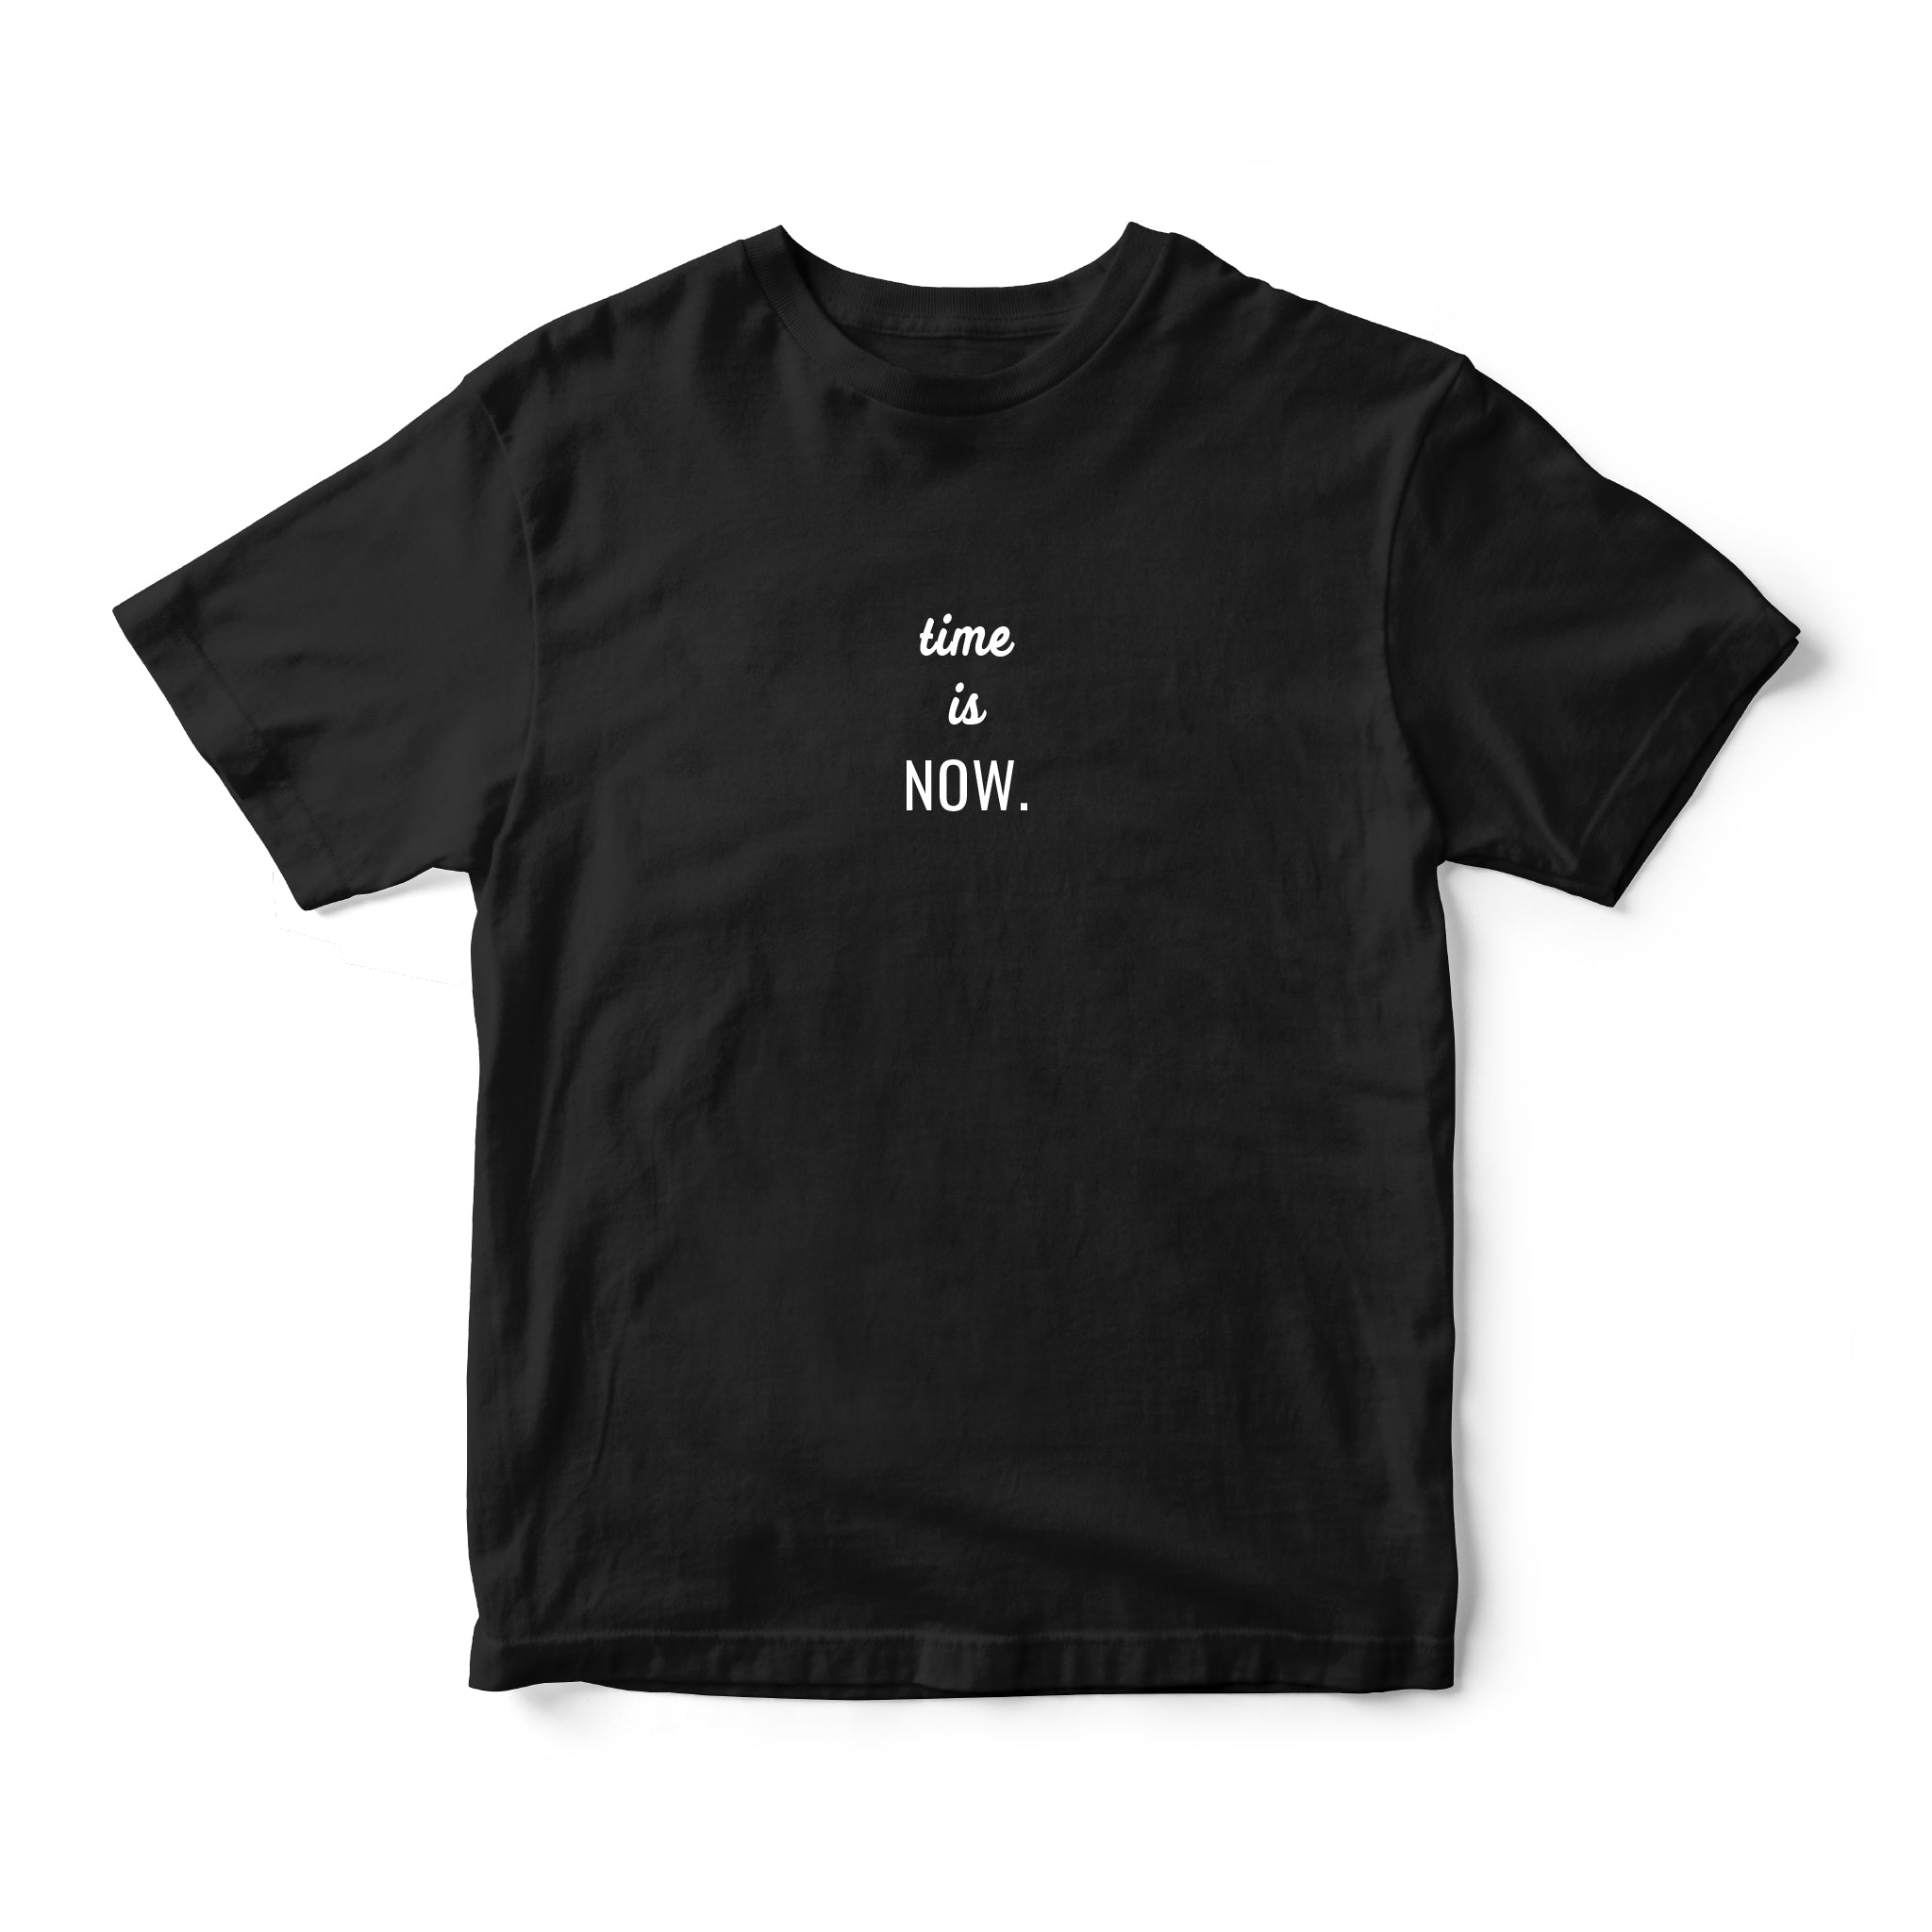 Instee Time Is Now T-shirt Unisex 100% Cotton